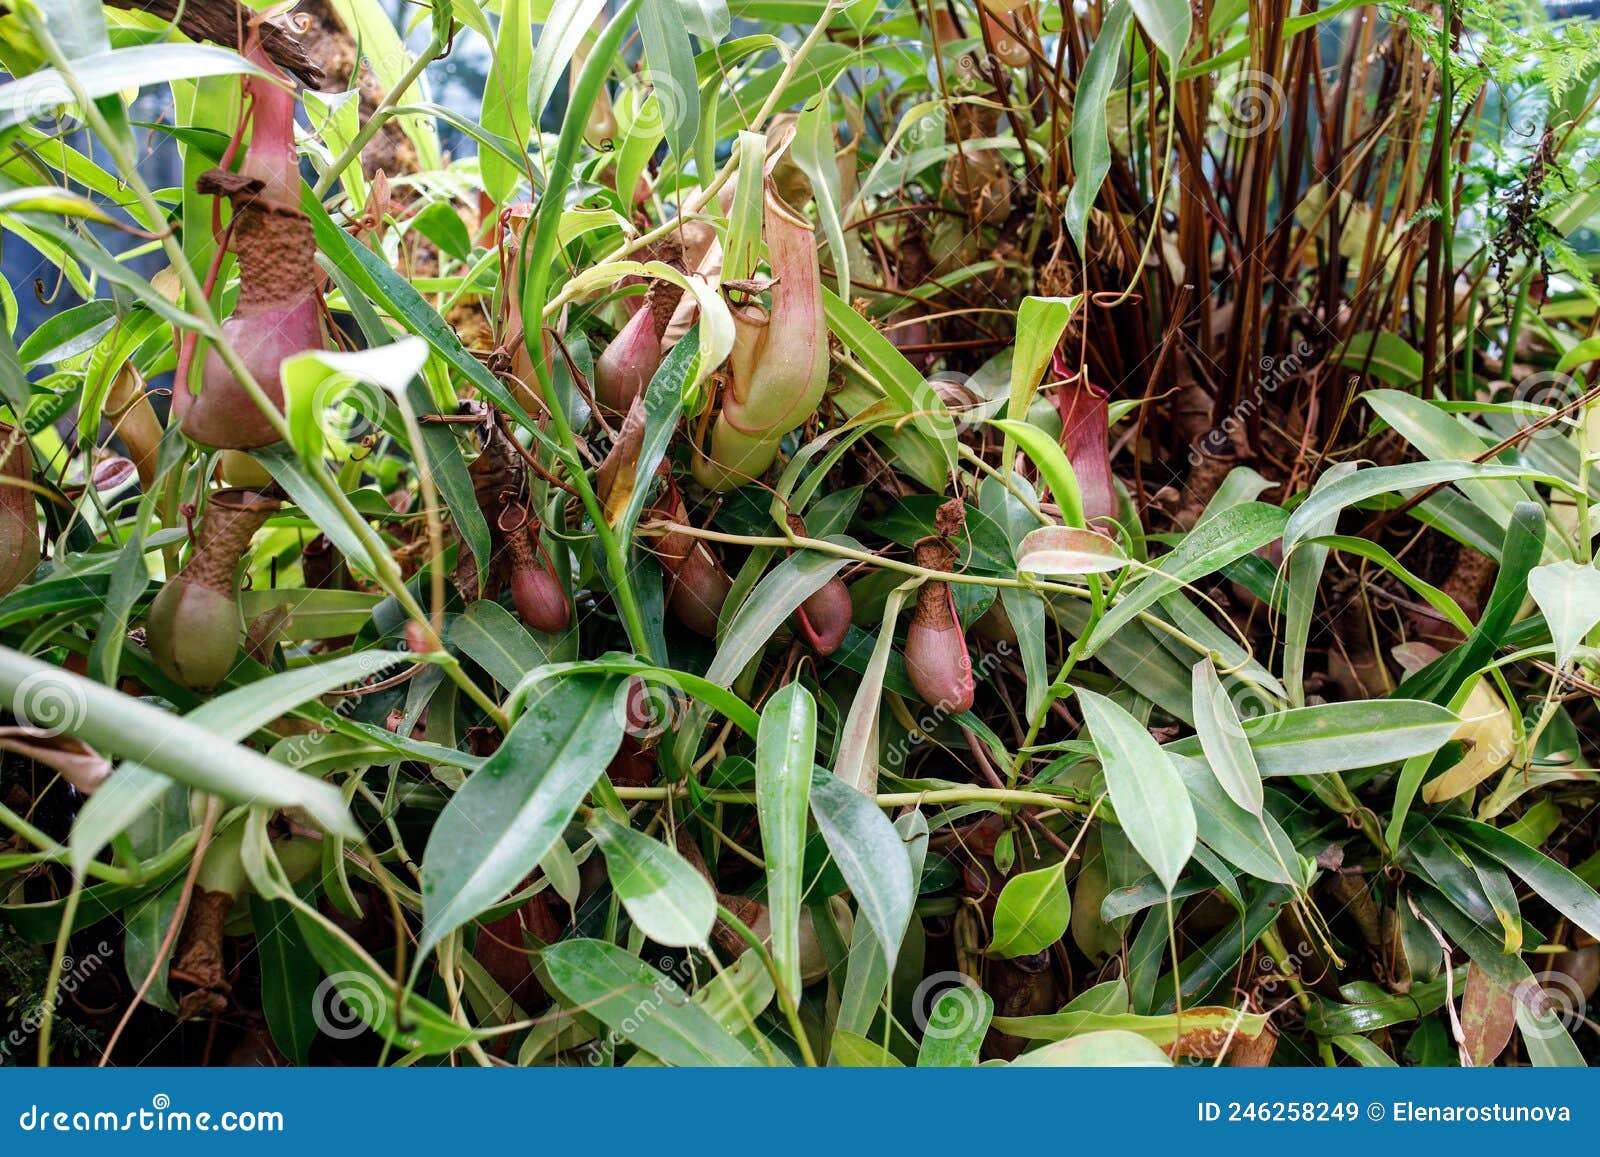 nepenthes, a pitfall traps, pitcher plant